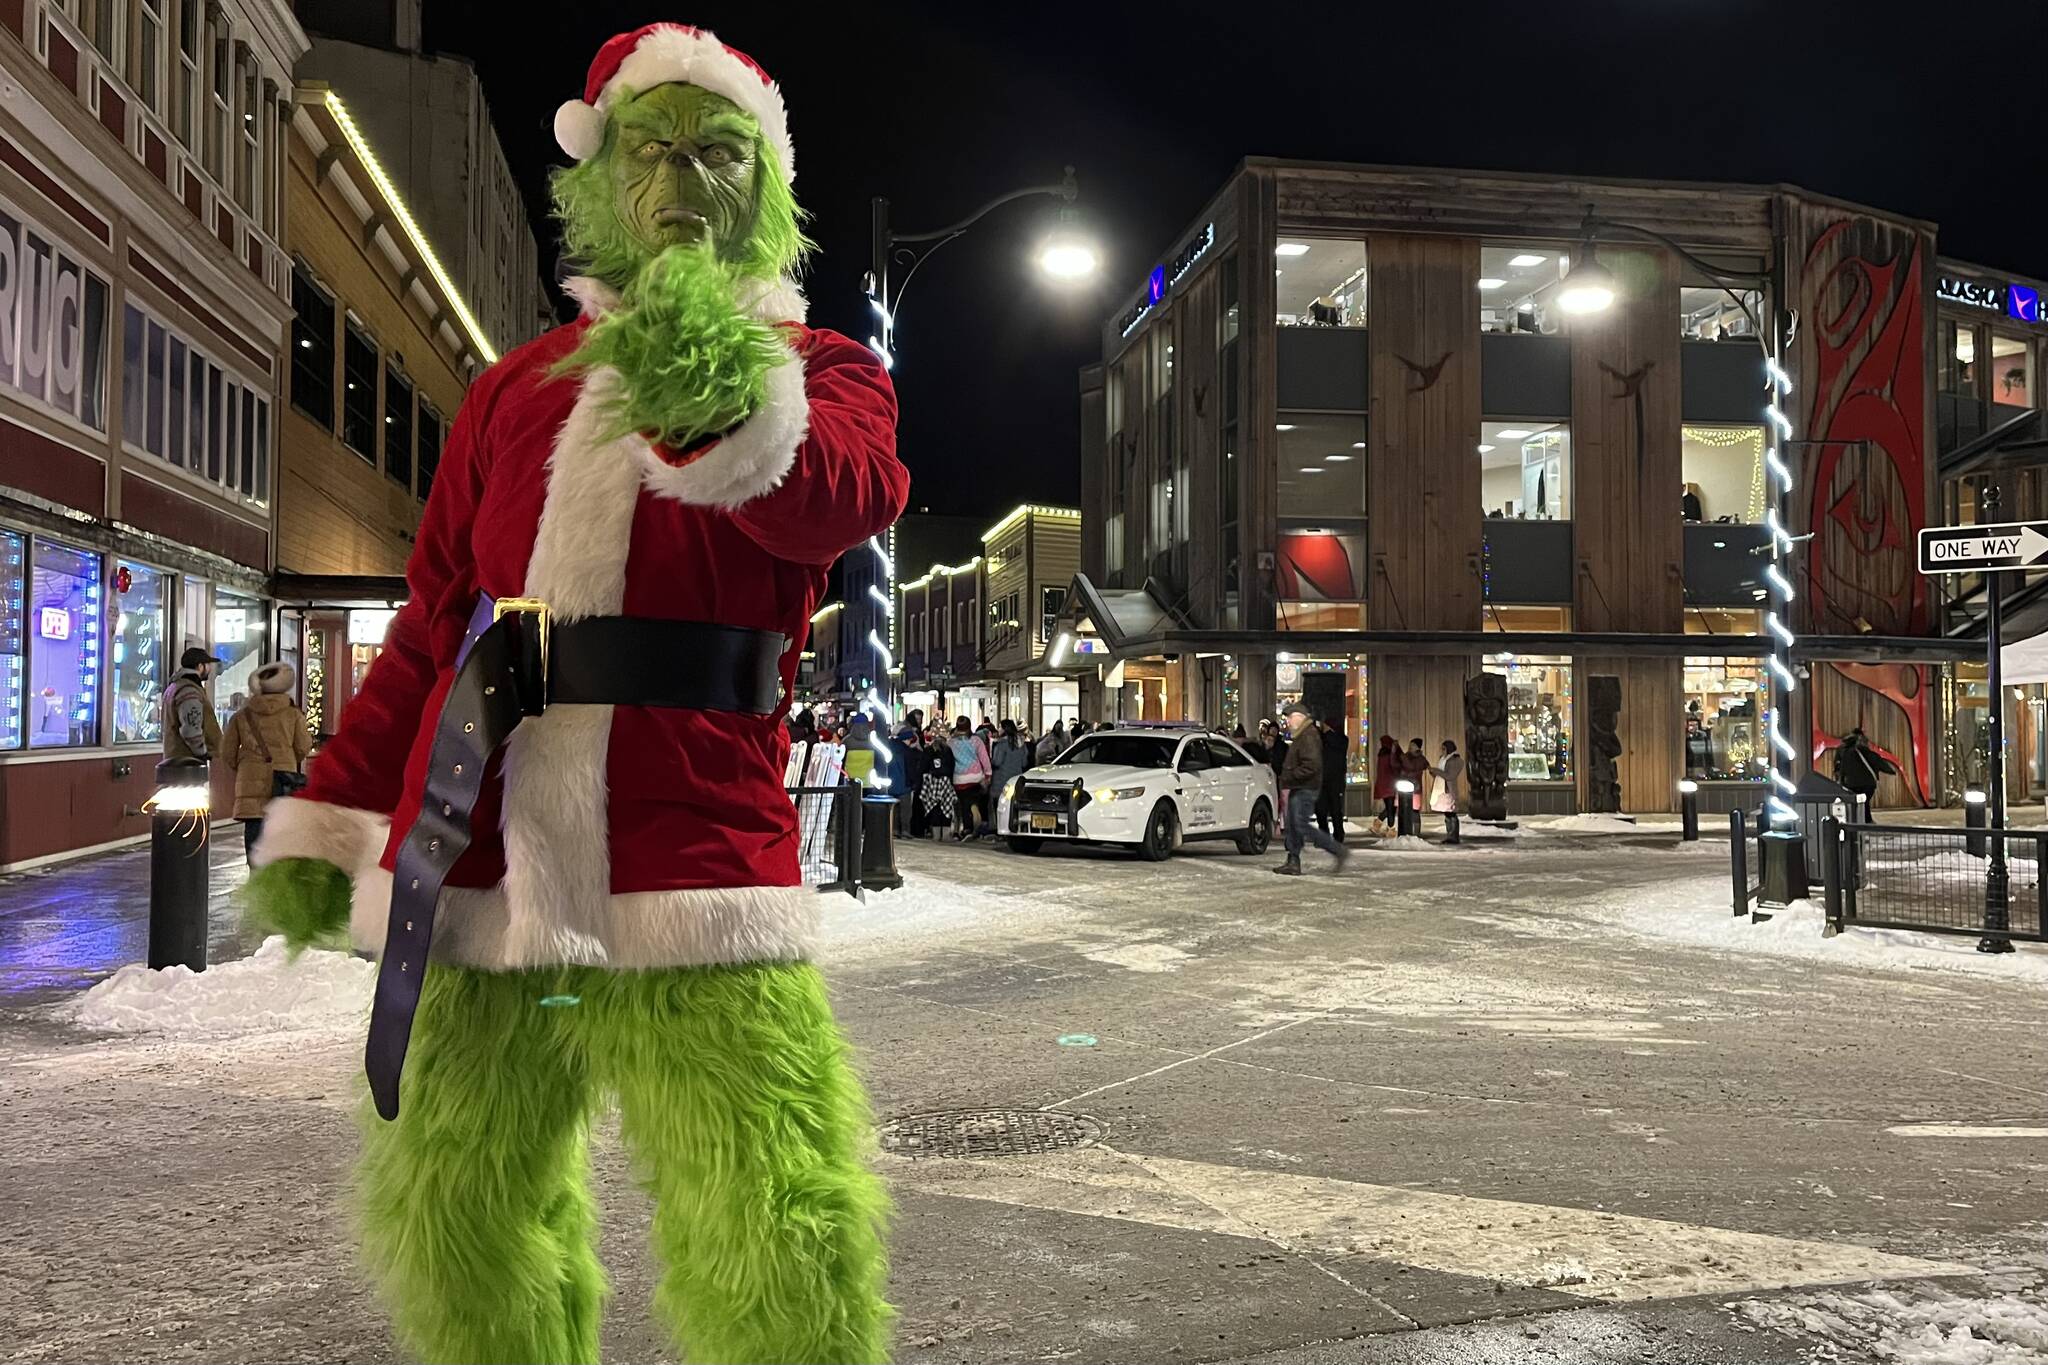 Even the Grinch got into the holiday spirit at Juneau’s Gallery Walk 2022 on Friday. (Jonson Kuhn / Juneau Empire)